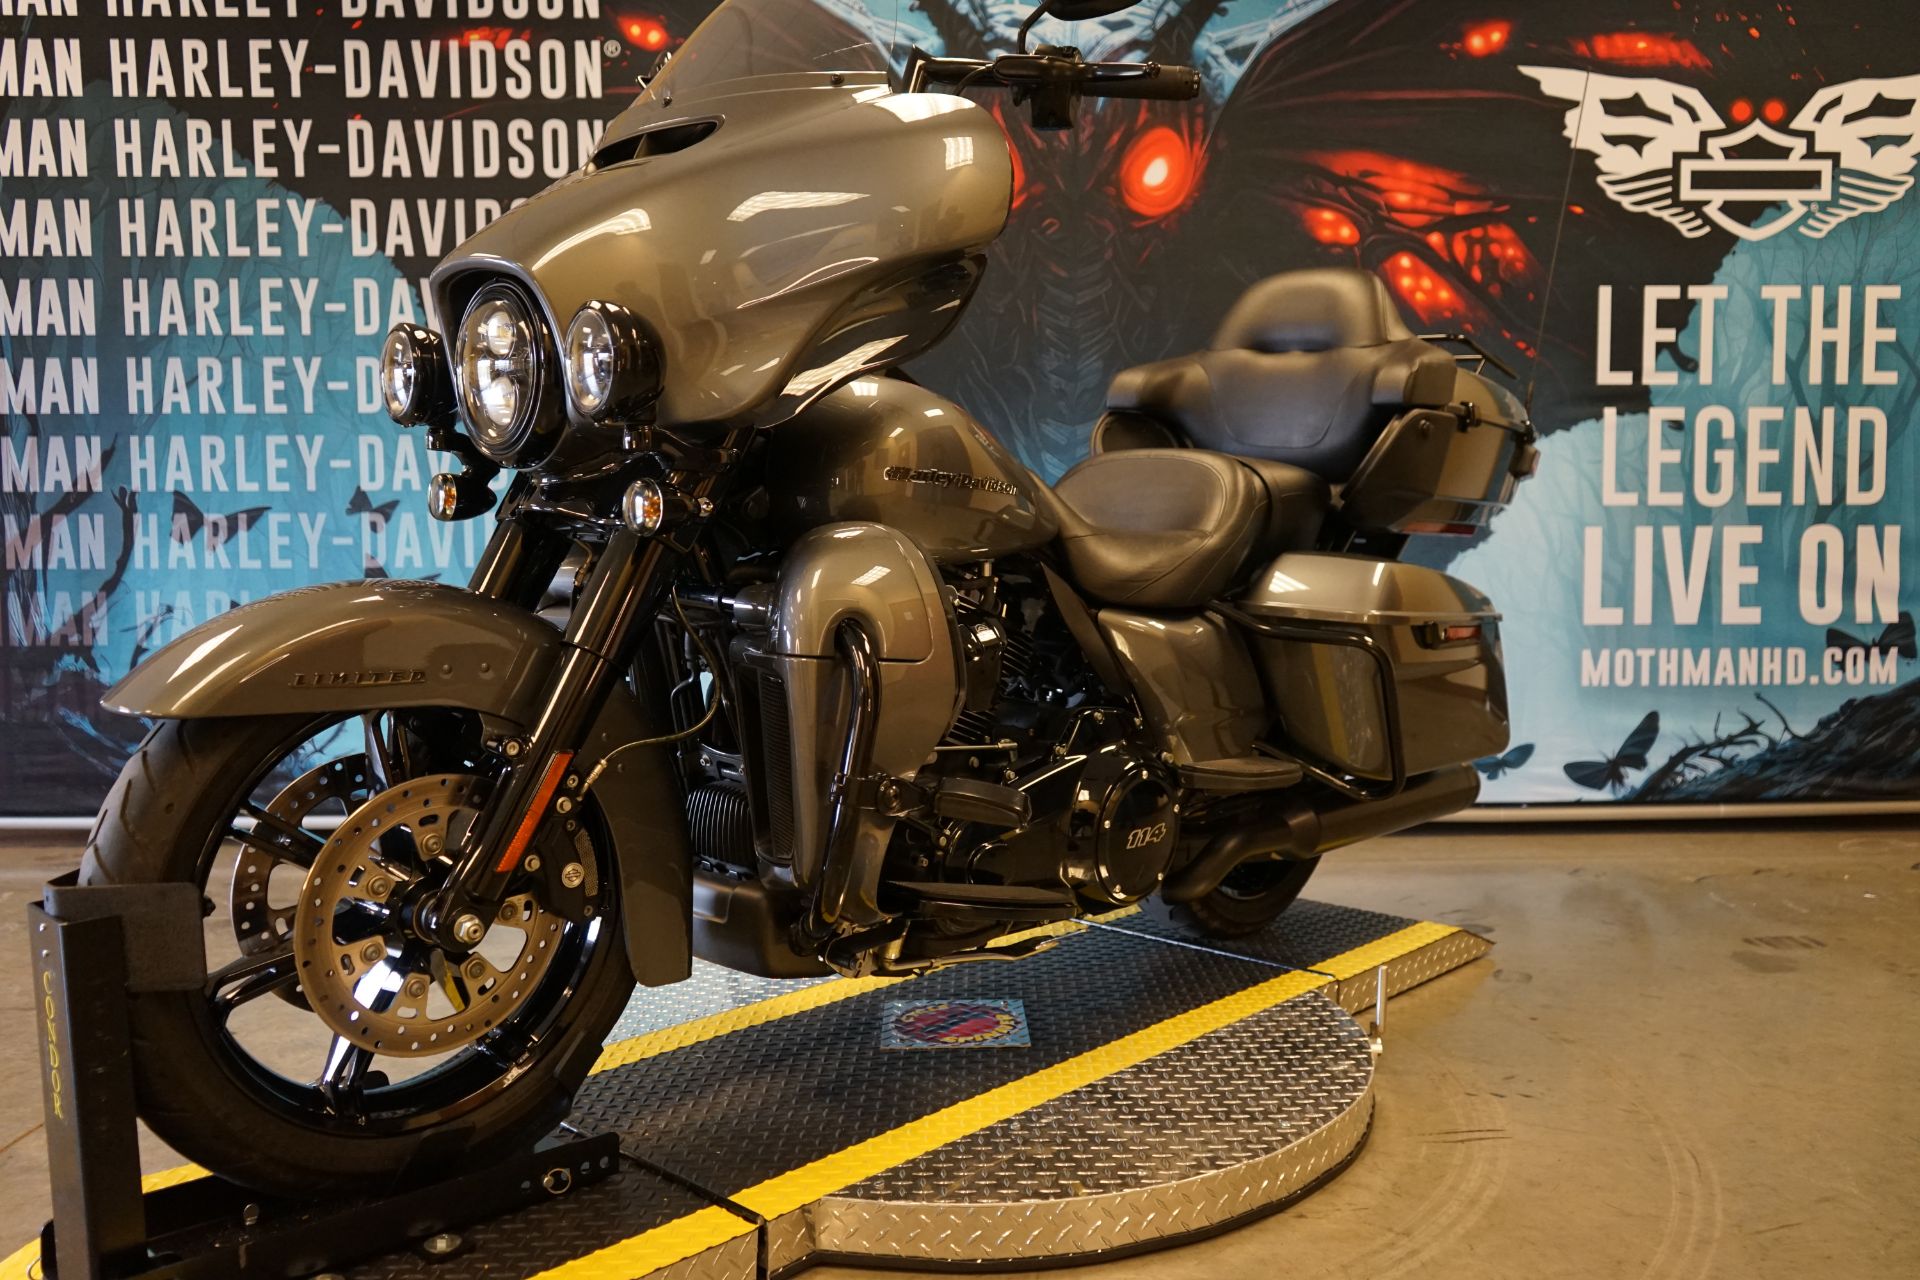 2021 Harley-Davidson Ultra Limited in Williamstown, West Virginia - Photo 11